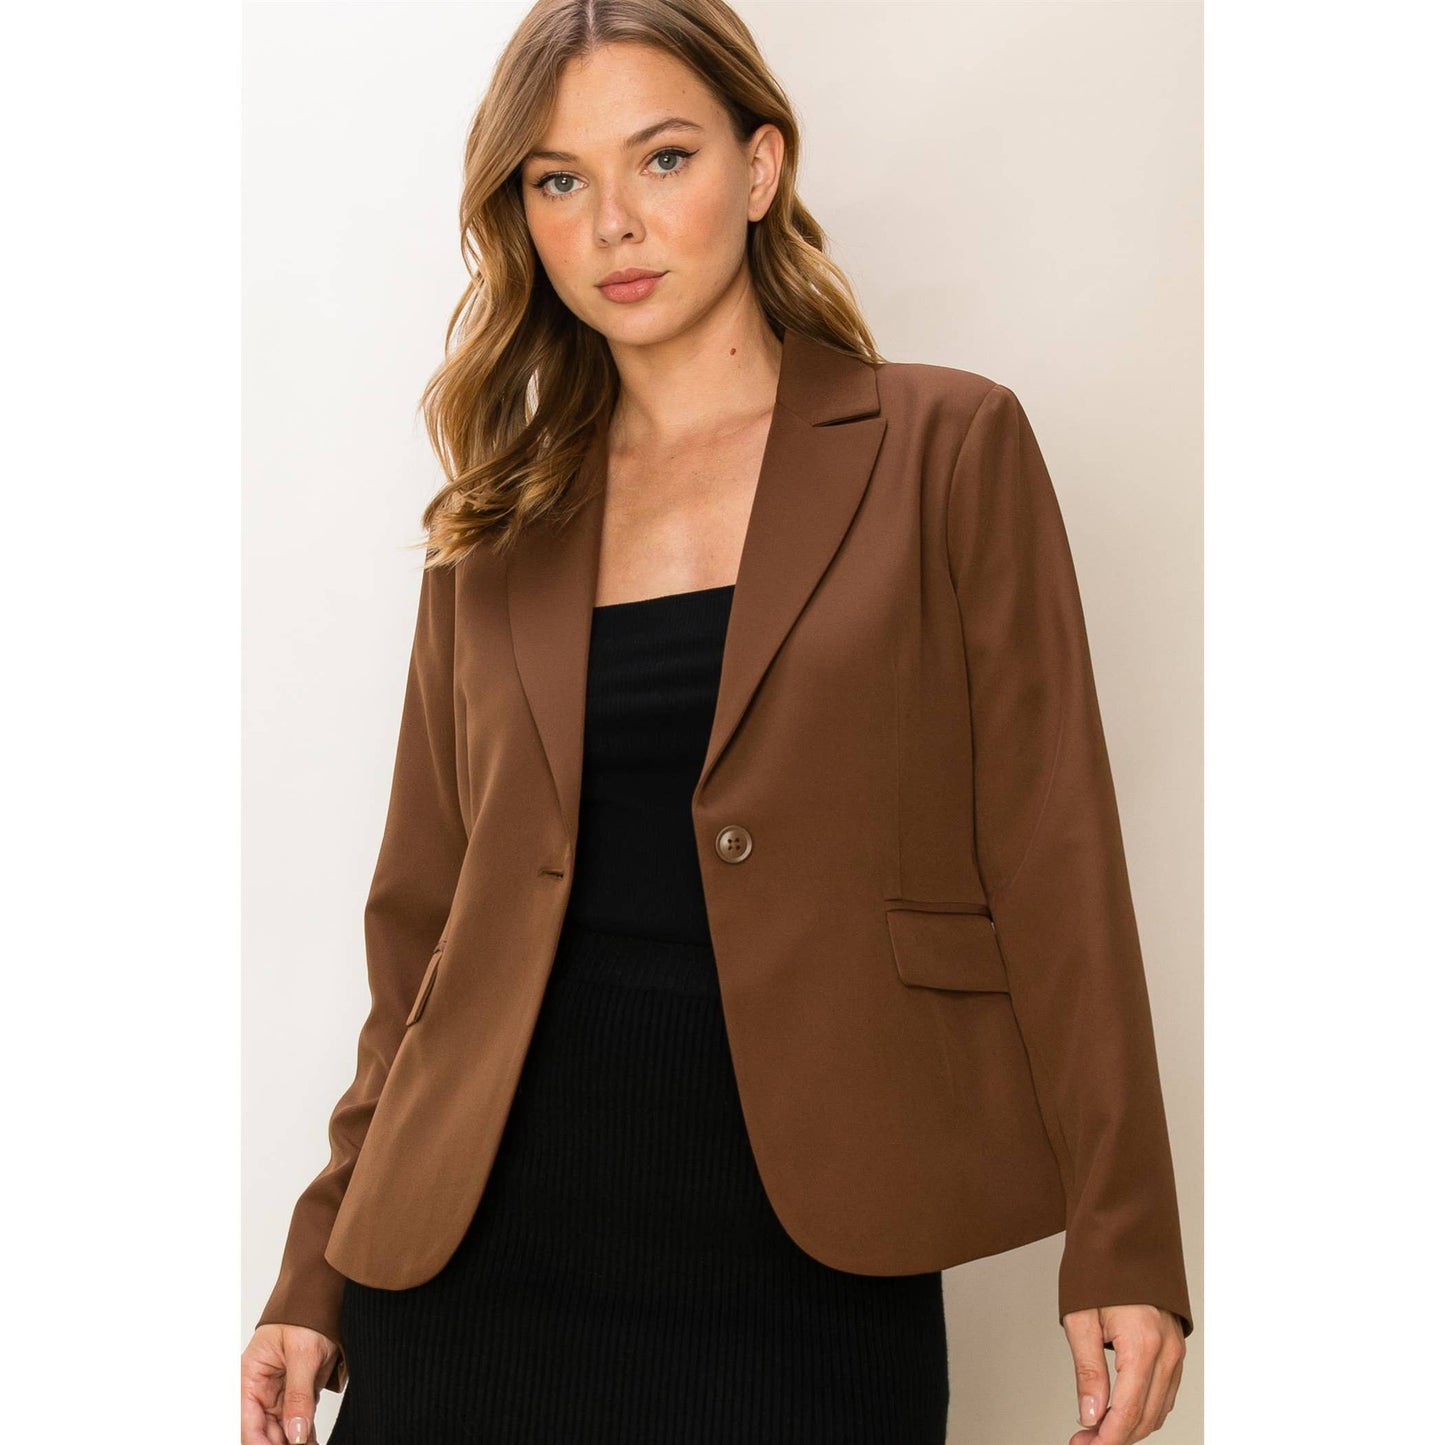 DIAL MY NUMBER SINGLE BUTTON BLAZER: BLACK / S